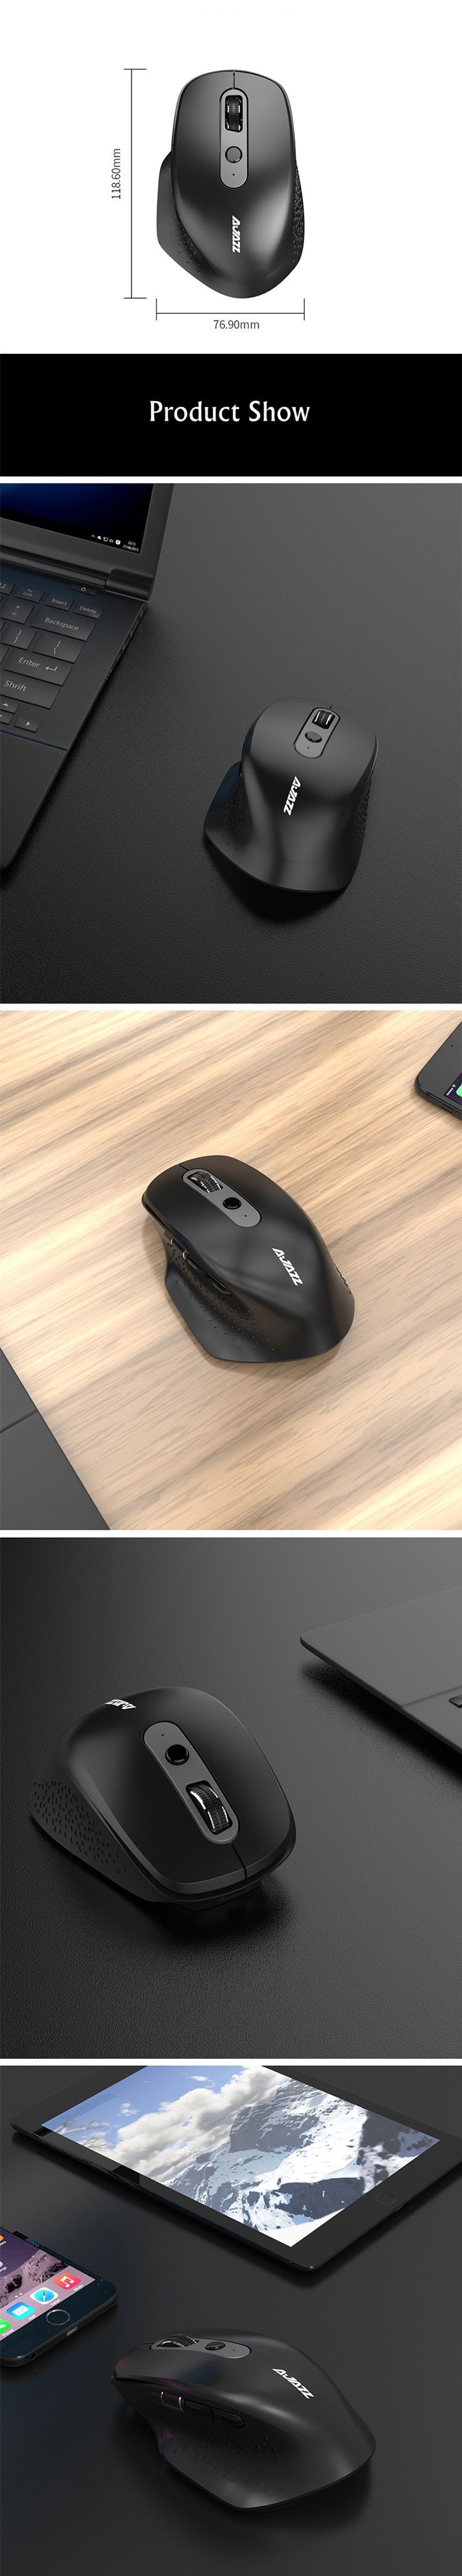 Ajazz-I660T-bluetooth-40-24G-Wireless-24G-Type---C-Port-Wired-Three-Mode-3200DPI-Portable-Mouse-1554528